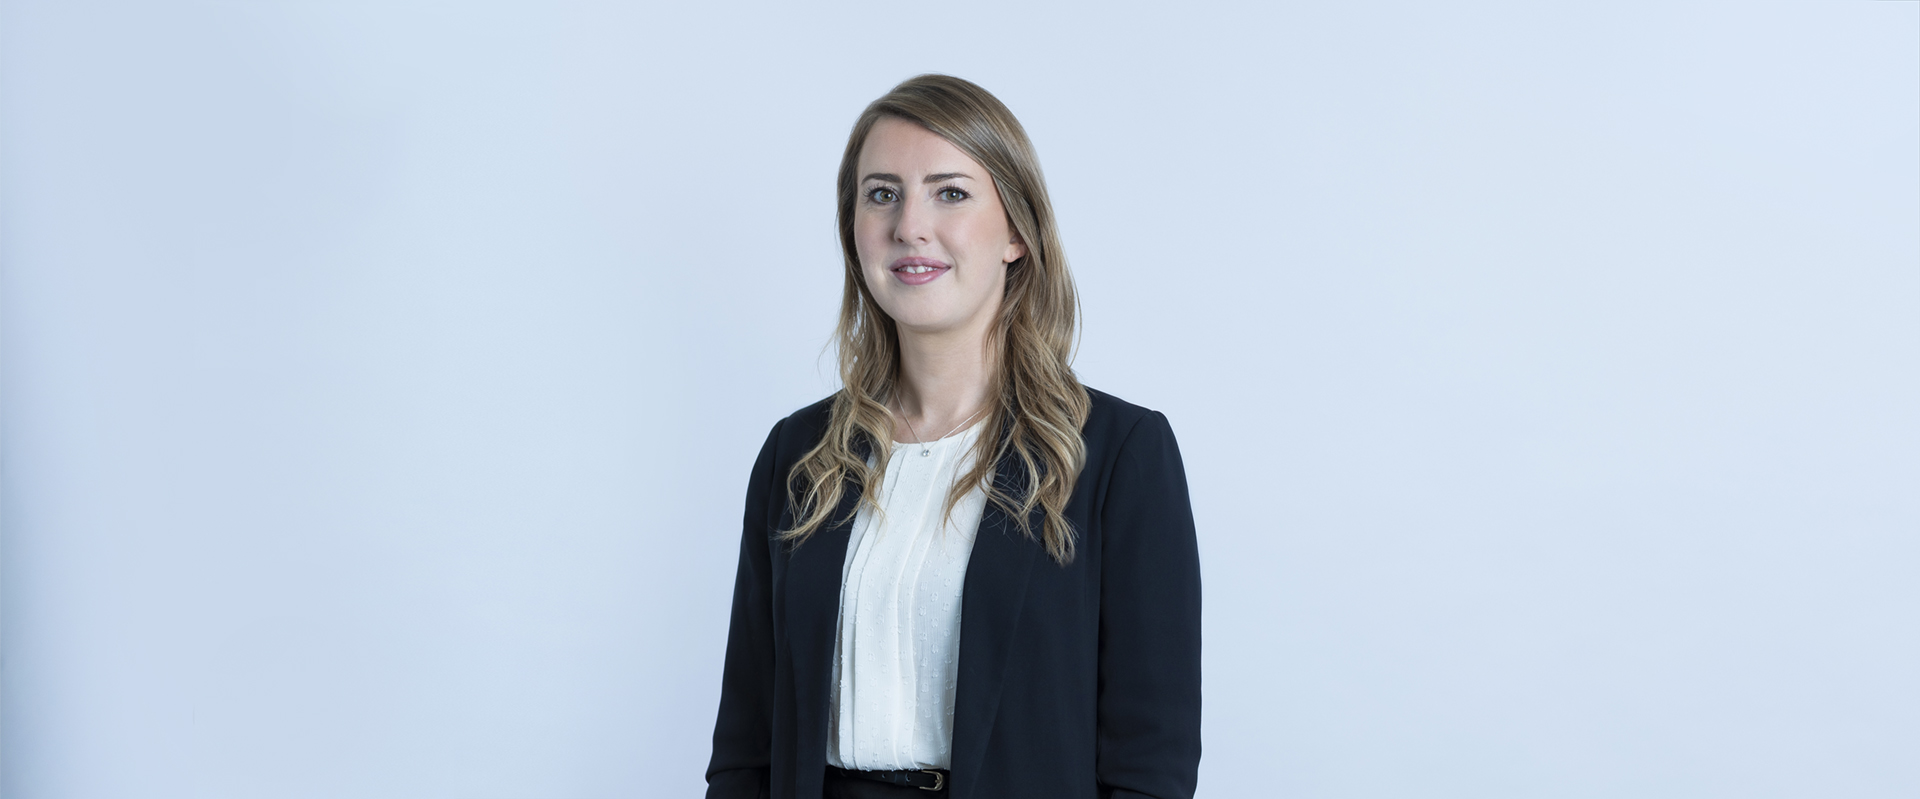 Sarah Newman - Solicitor in the Litigation team